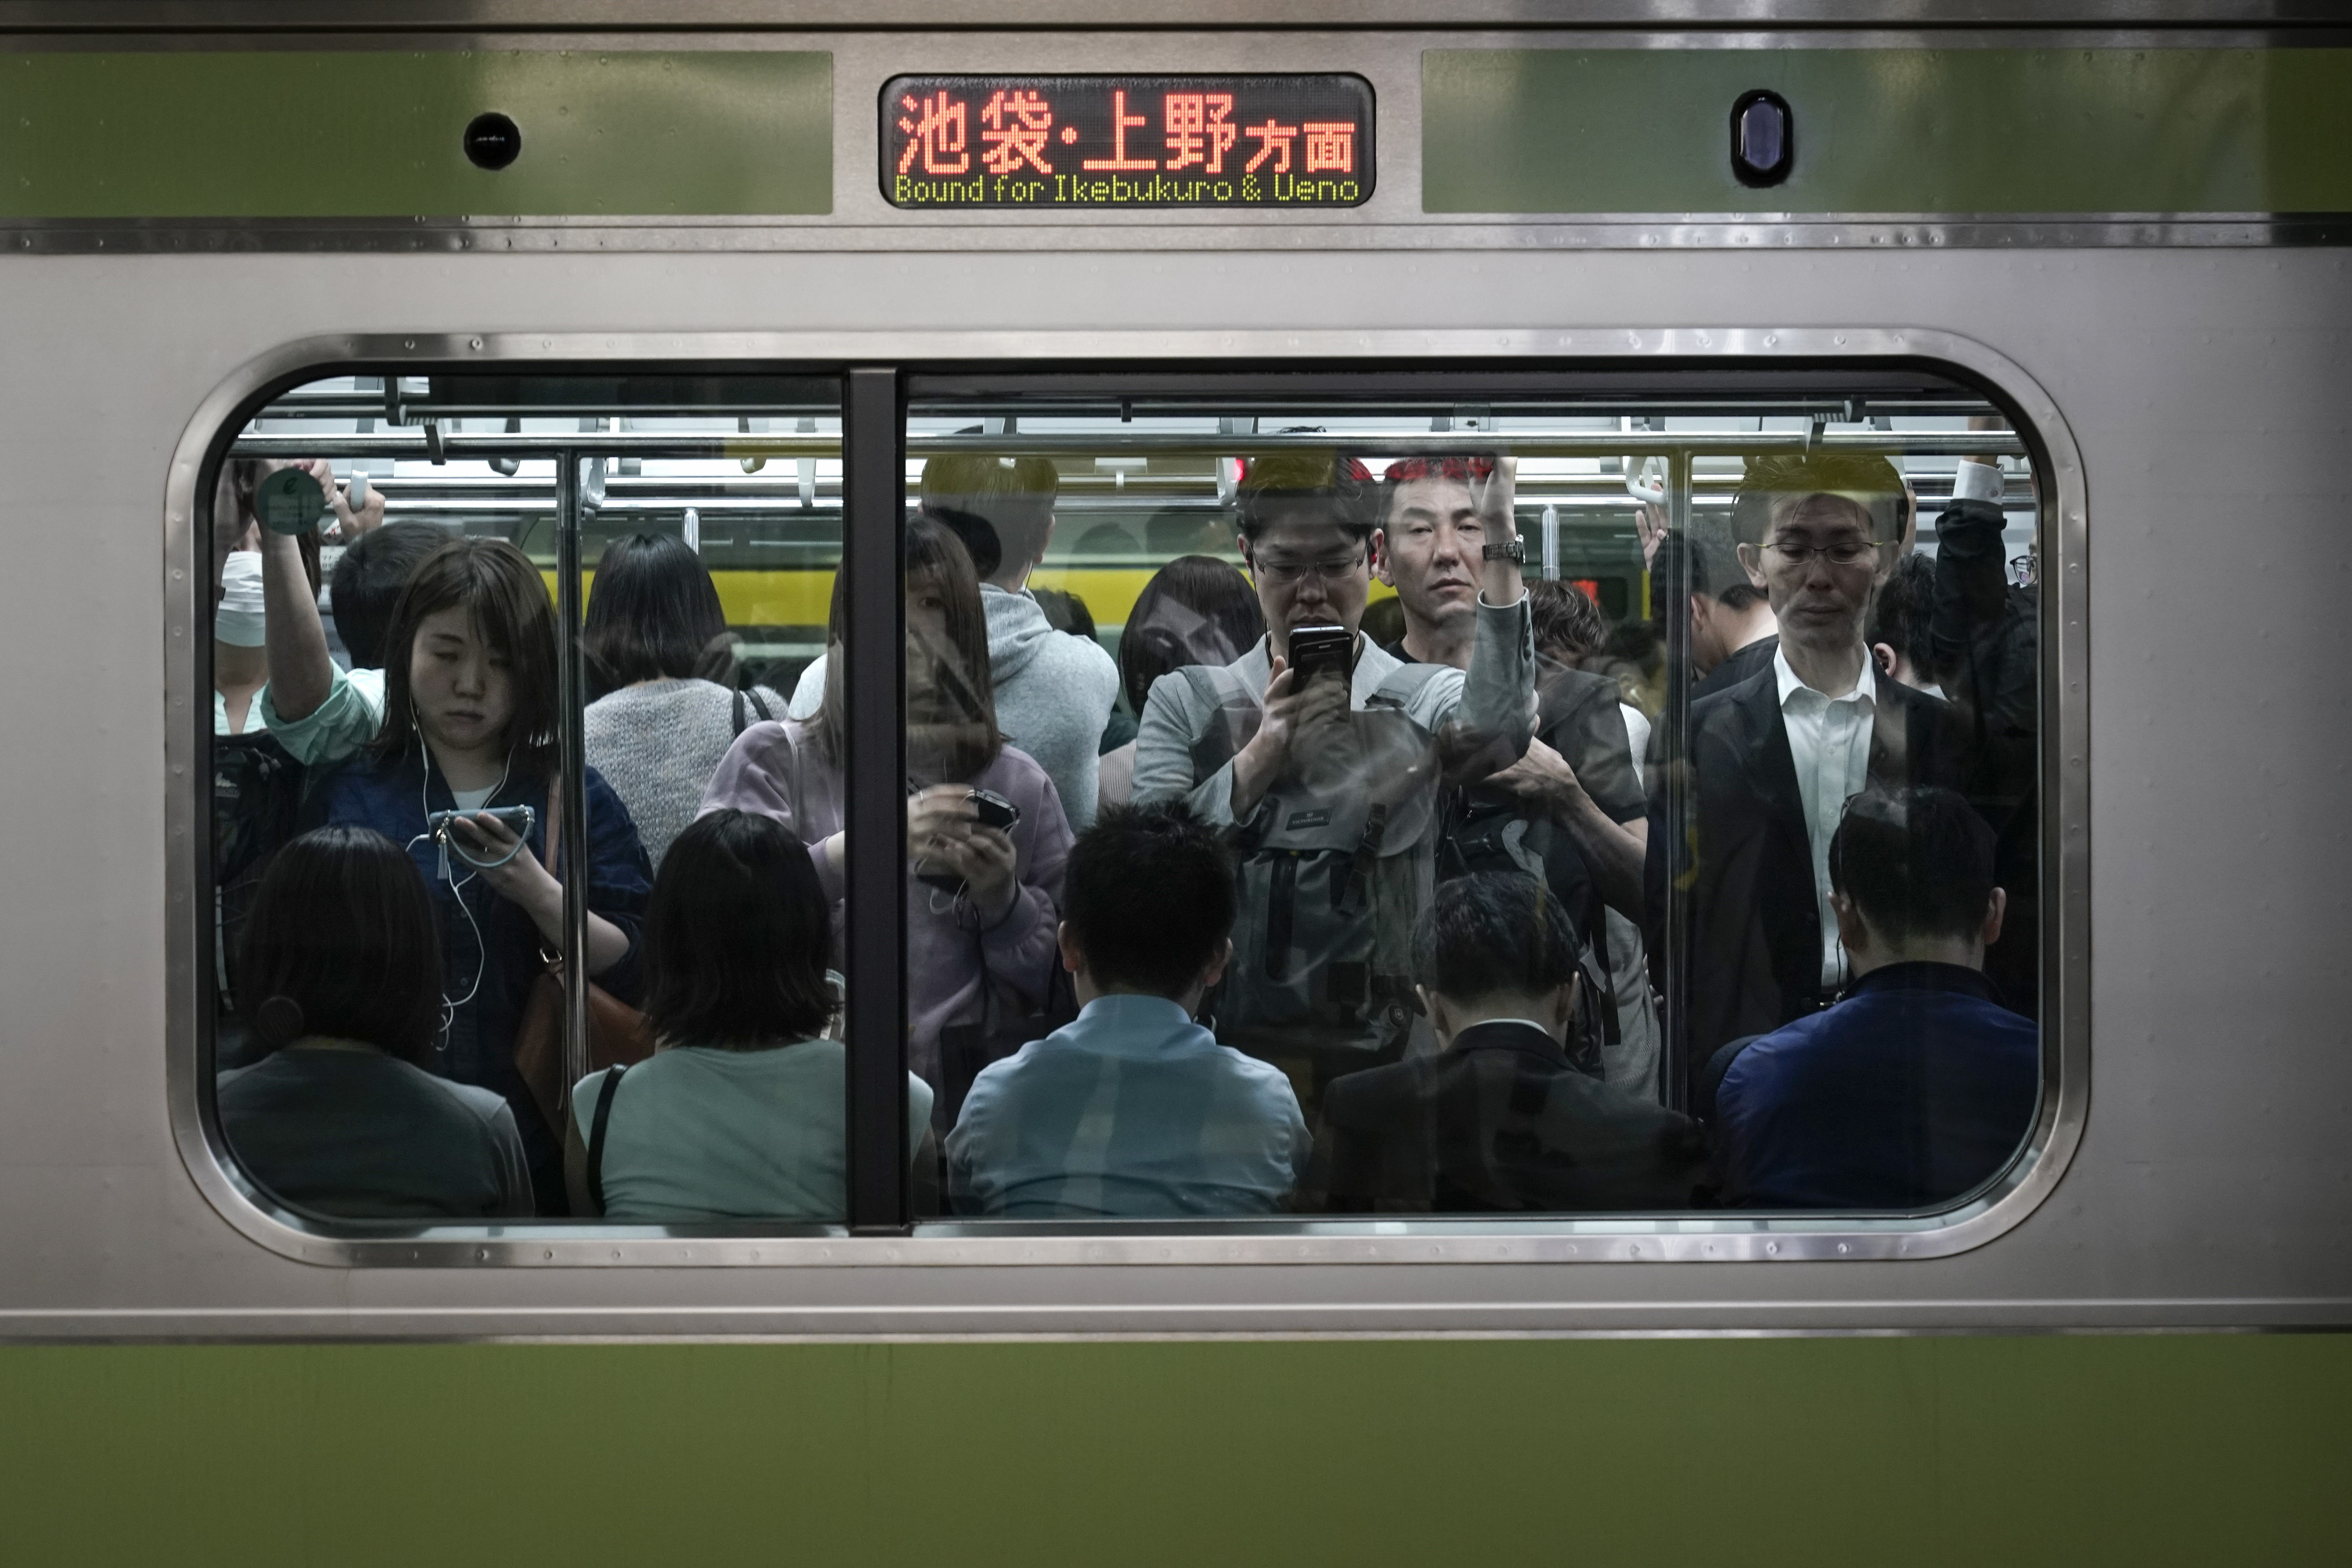 In this Saturday, May 25, 2019, photo, commuters stand in a packed Yamanote Line train while waiting for the train to depart at Shinjuku Station in Tokyo. Want to take a glimpse of daily life in downtown Tokyo? Take a ride on the Yamanote loop line. For most Tokyoites, the line means an incredibly punctual and efficient transportation system for commuting. For tourists, it offers a glimpse into the life of ordinary people living in the city. (AP Photo/Jae C. Hong)